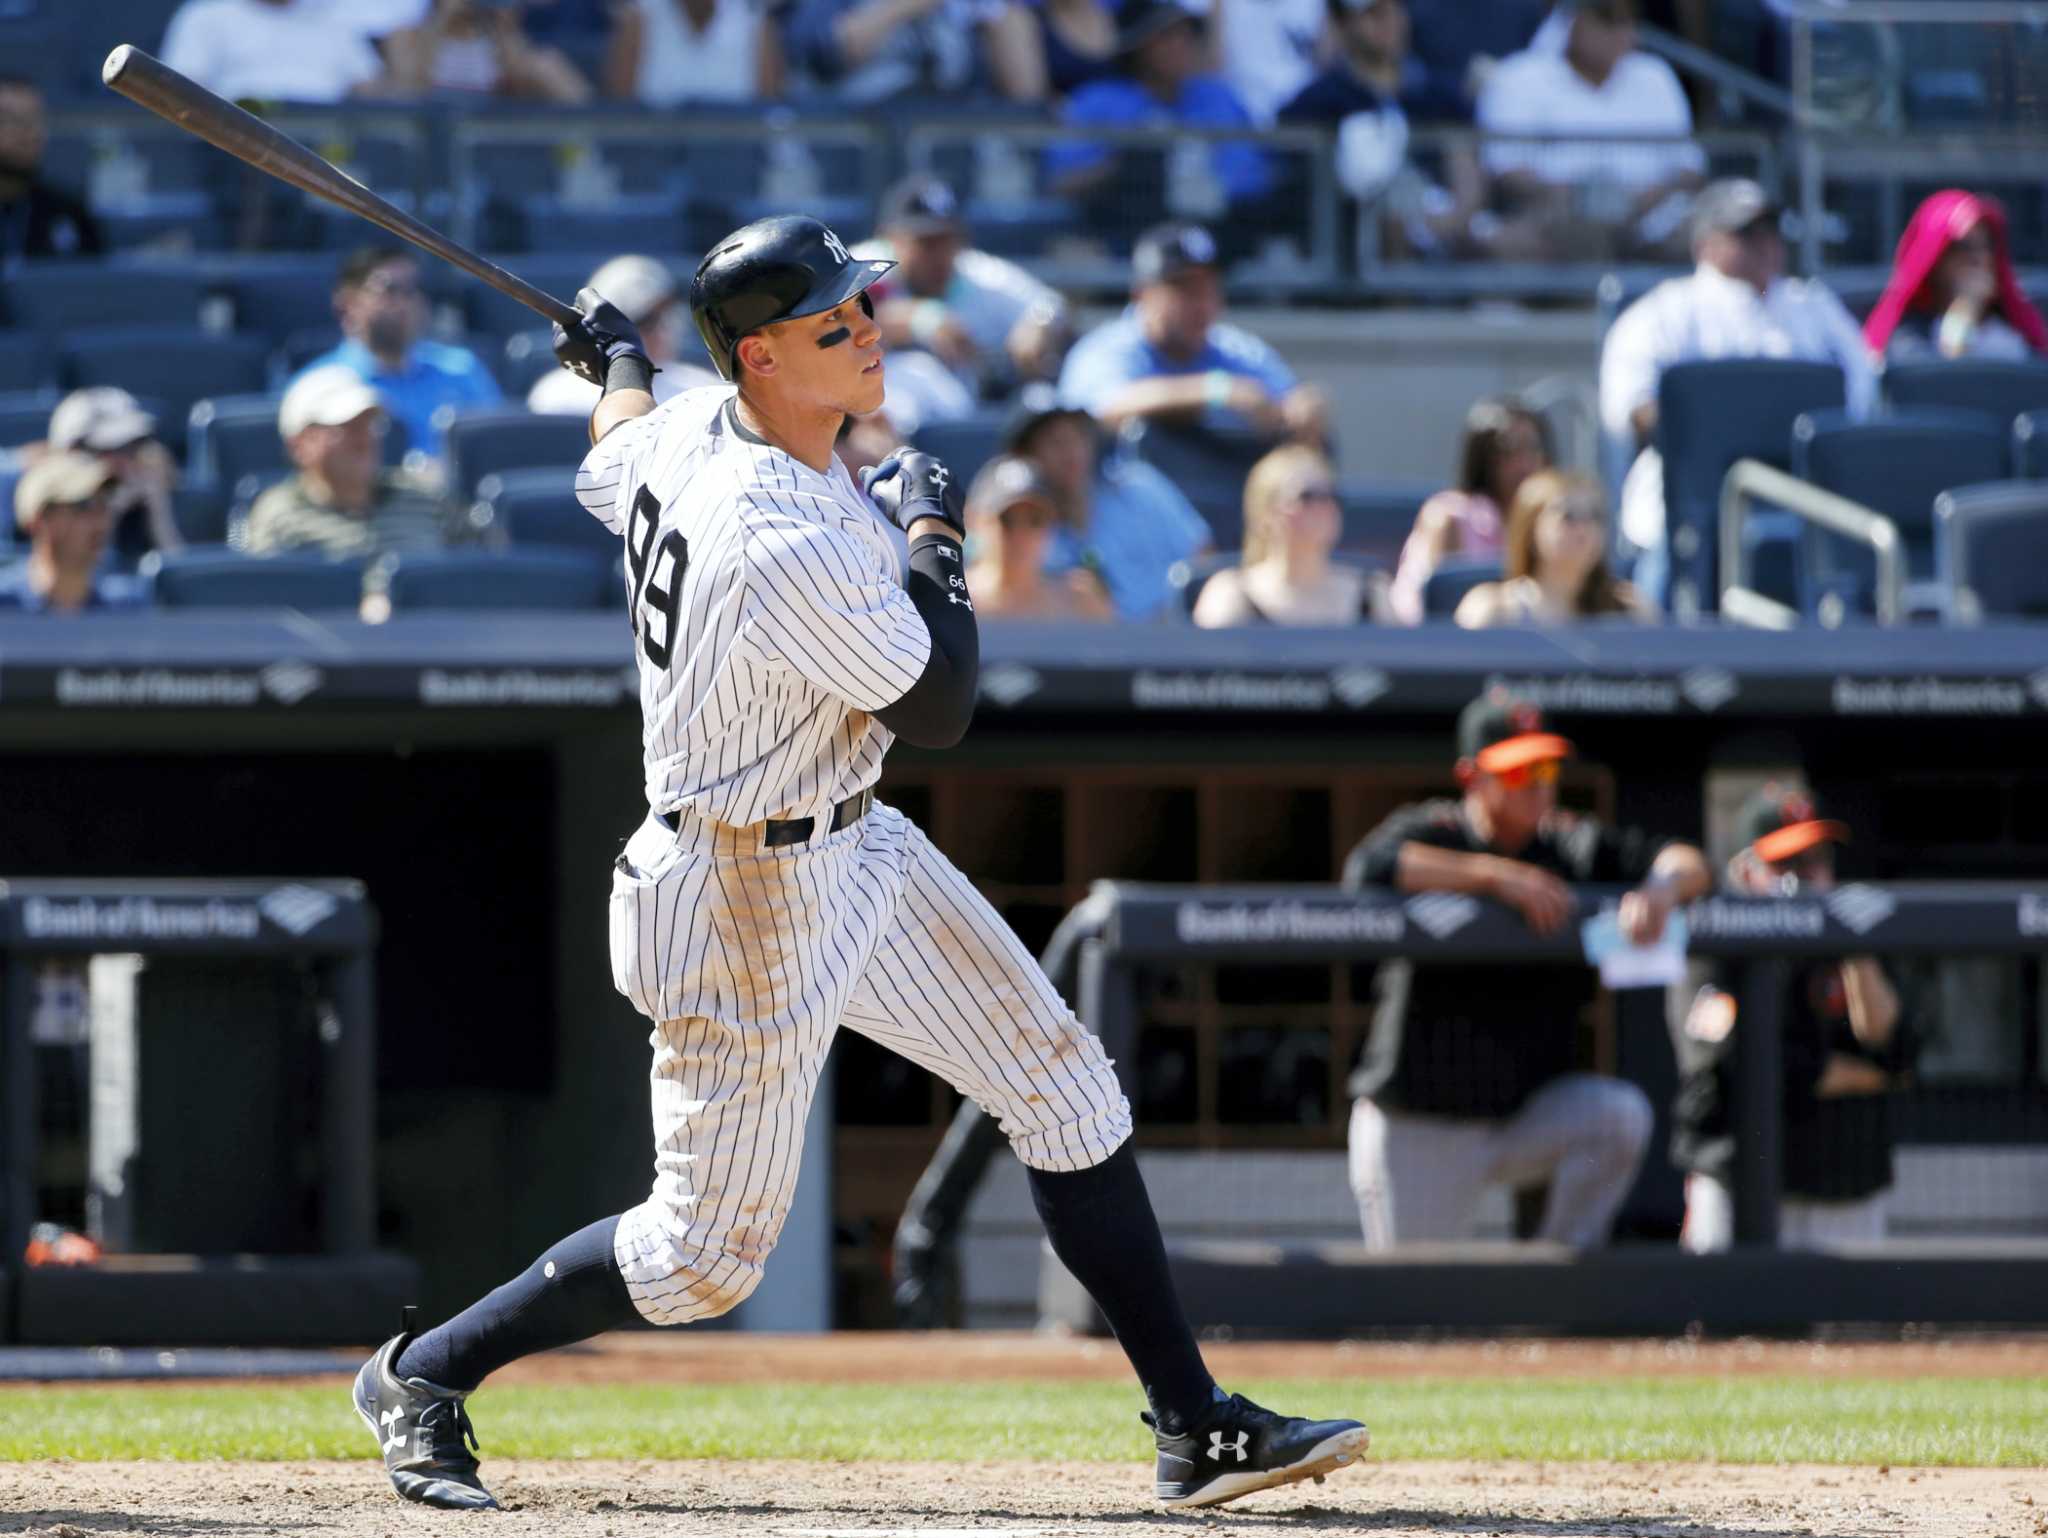 Aaron Judge 'is set to return for the Yankees on FRIDAY' against Baltimore  Orioles having been out since June 3 with sprained right big toe